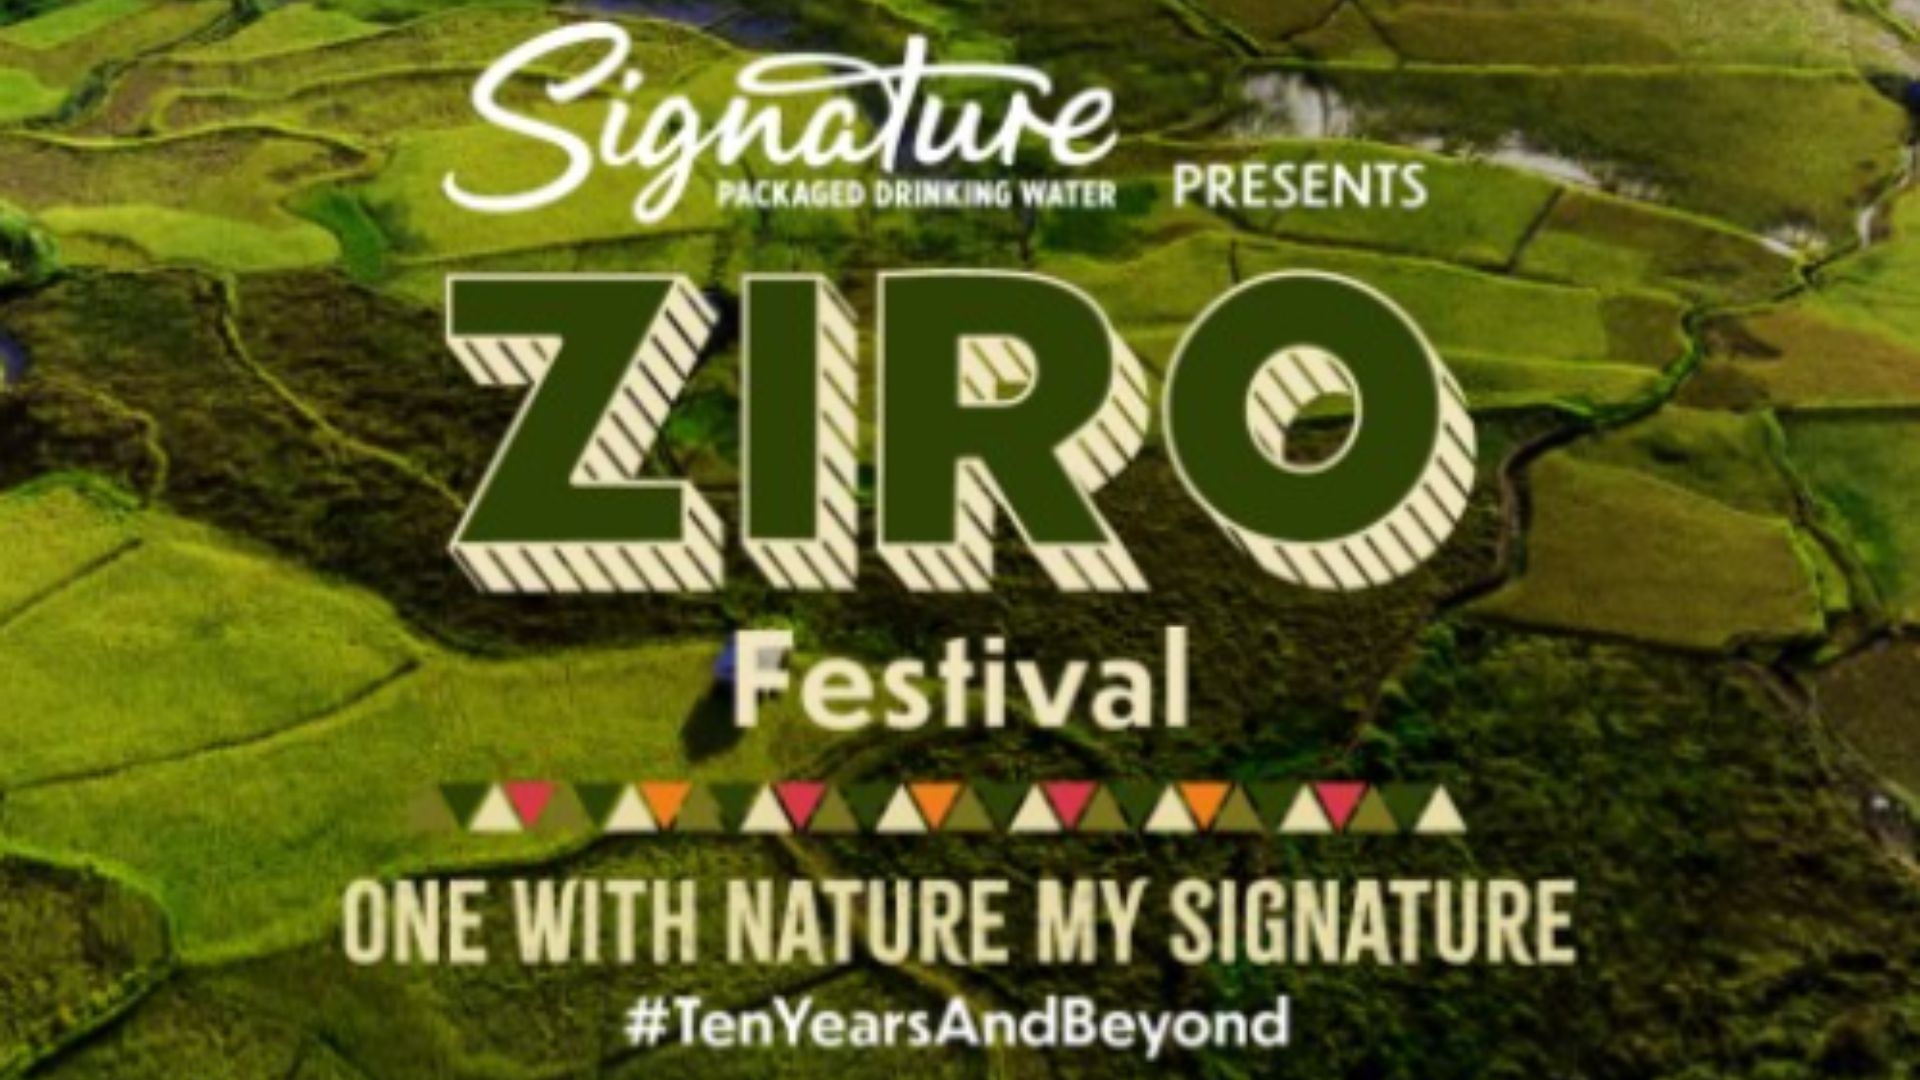 Farhan And Mohit Chauhan To Grace The Stage At Signature's Ziro Music Festival